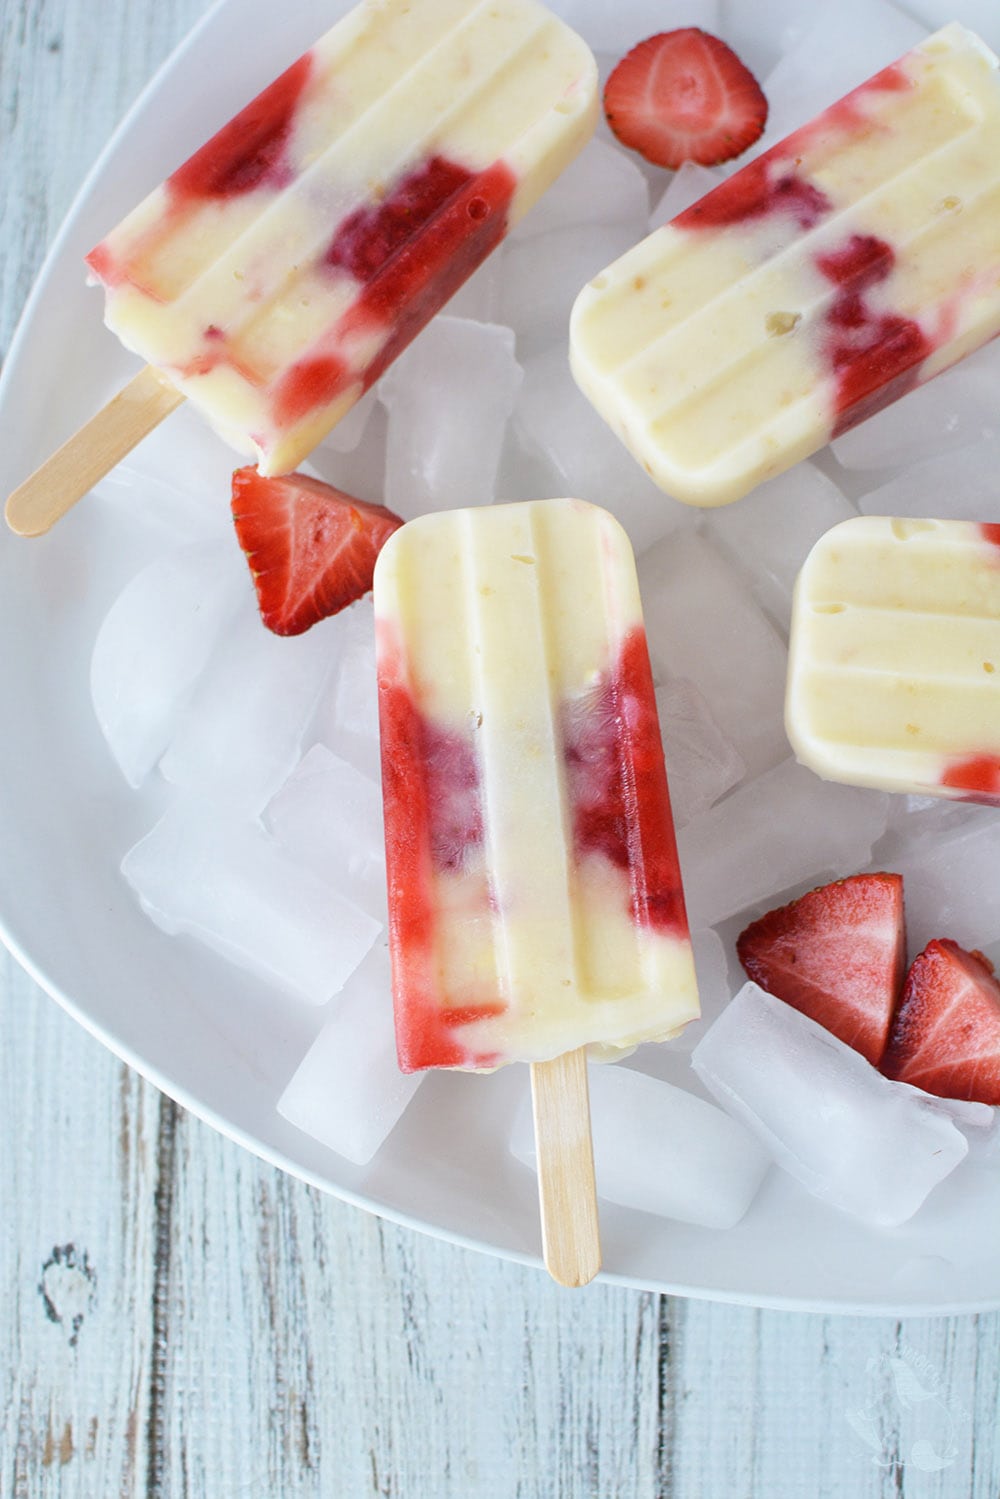 Homemade ice pops lying on a bed of ice with strawberries